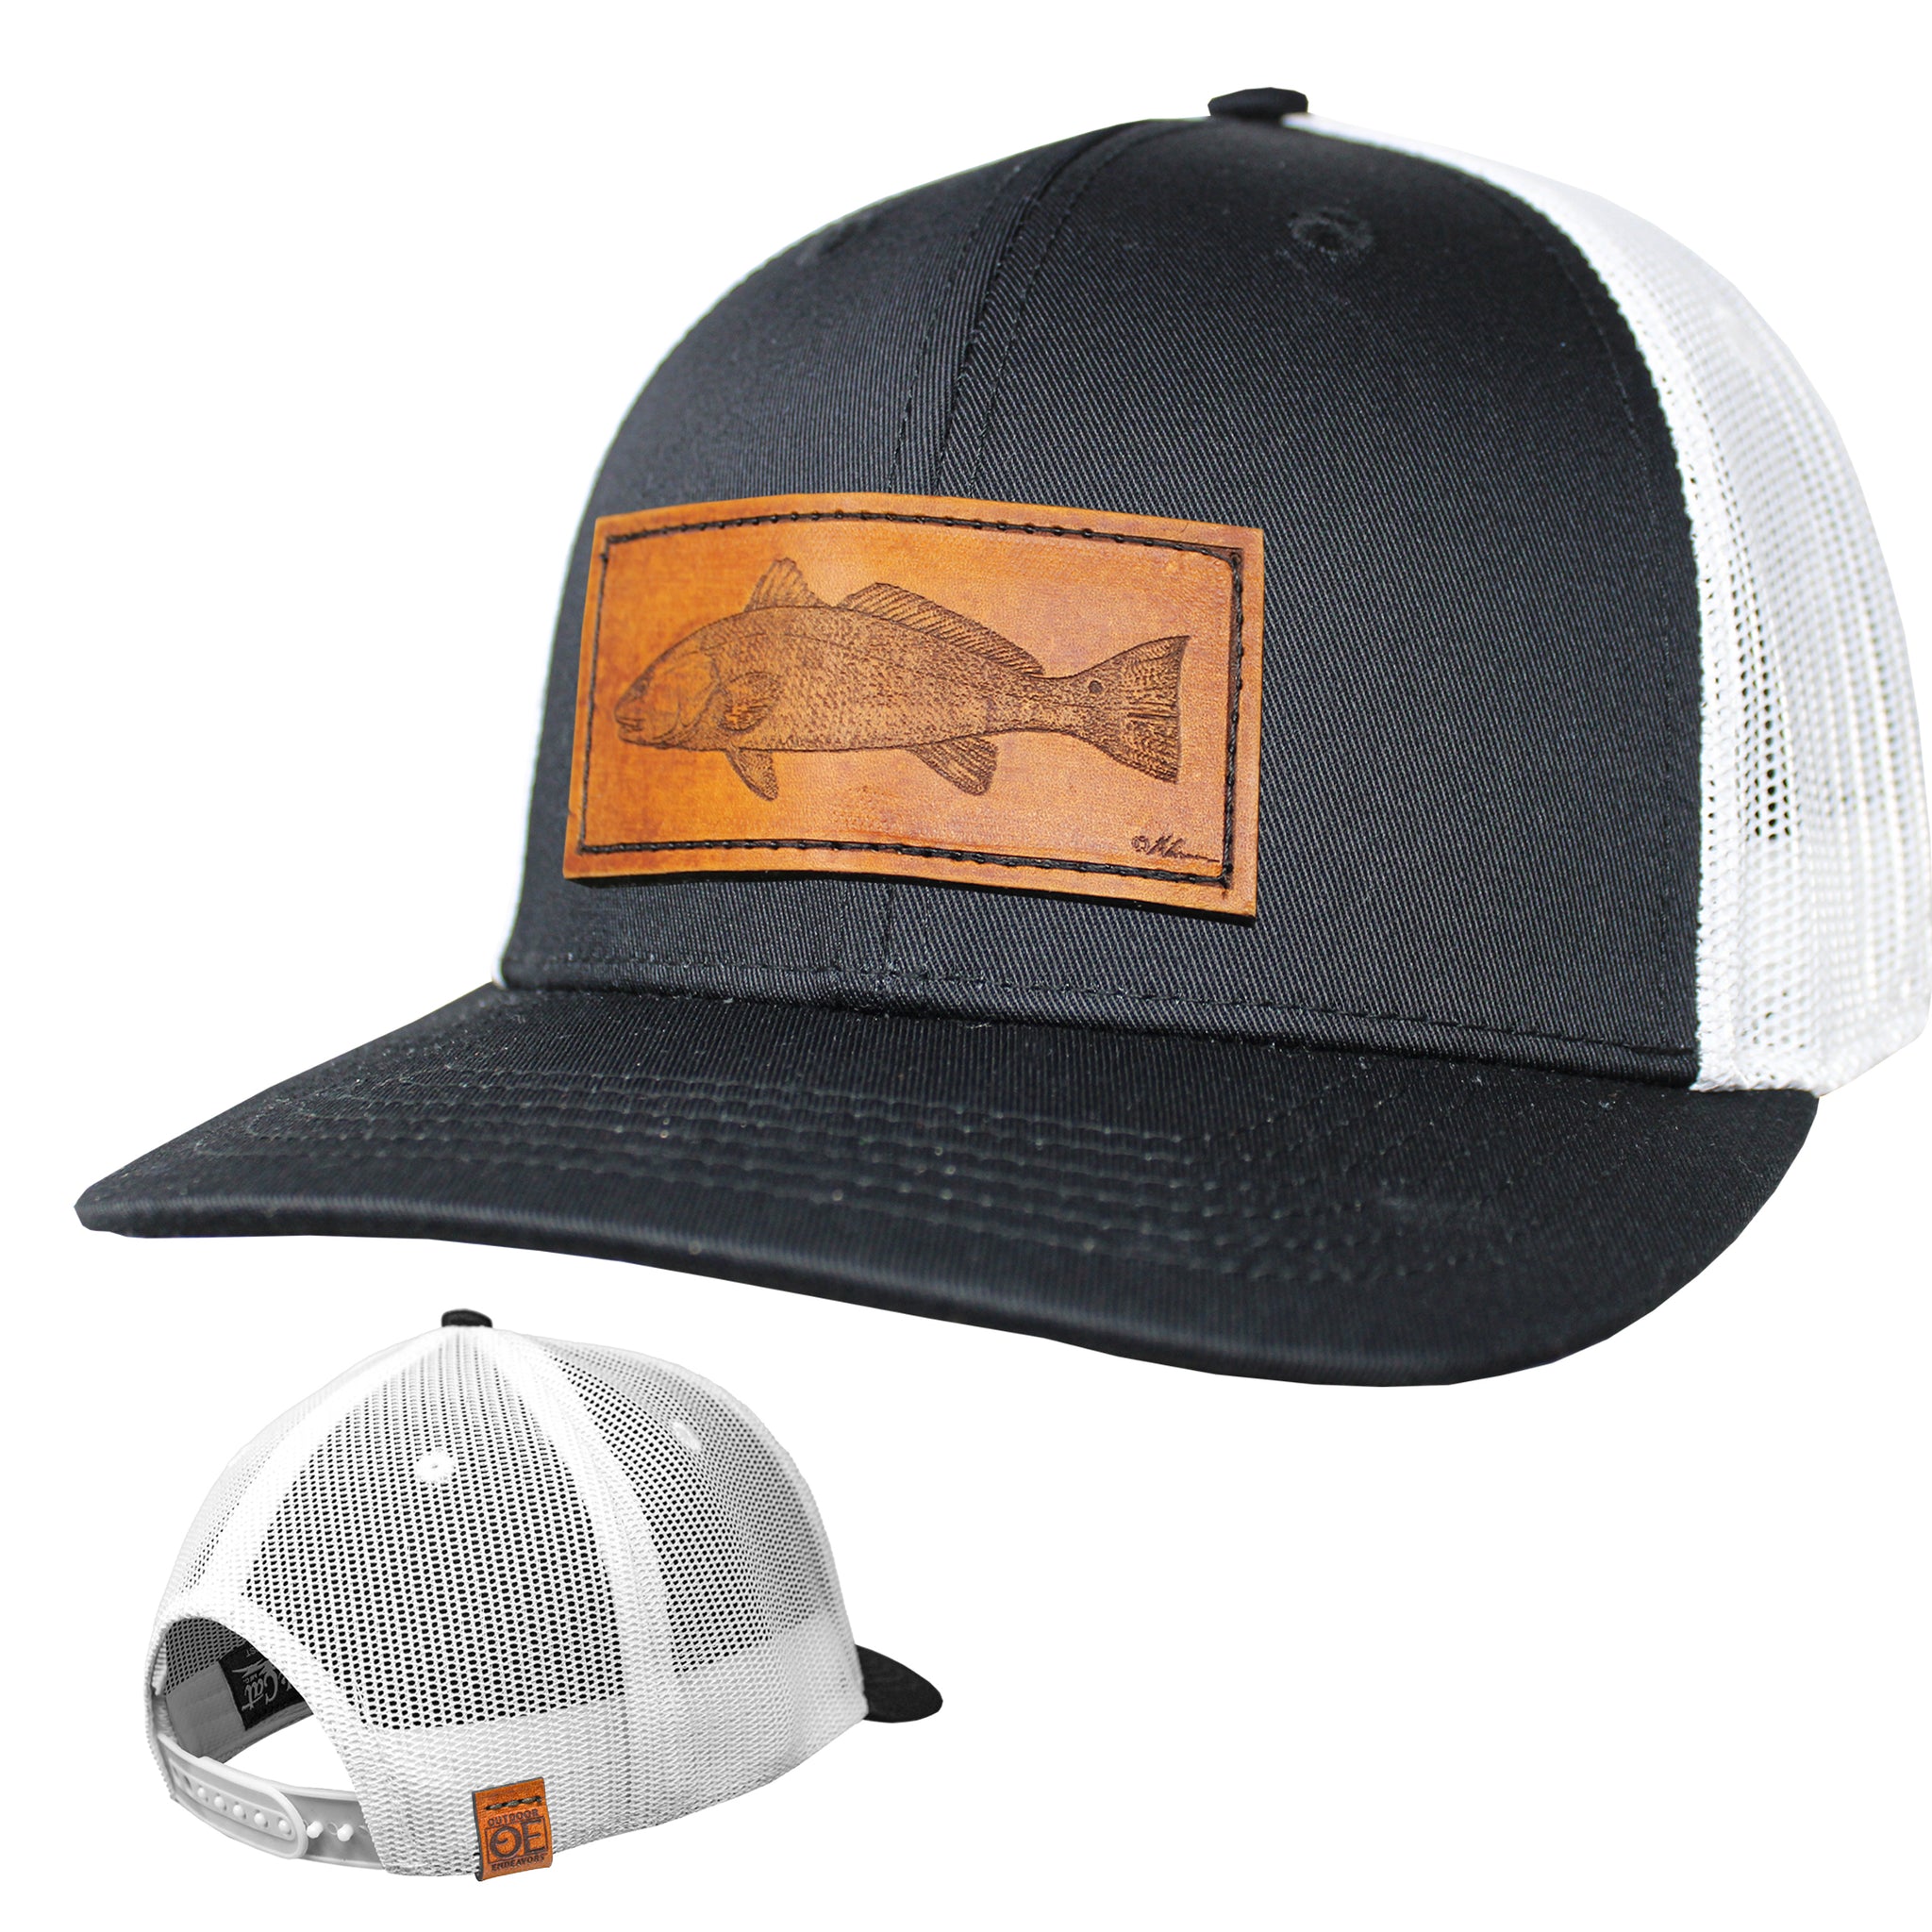 OE - Performance Trucker Hat - Redfish Leather Patch